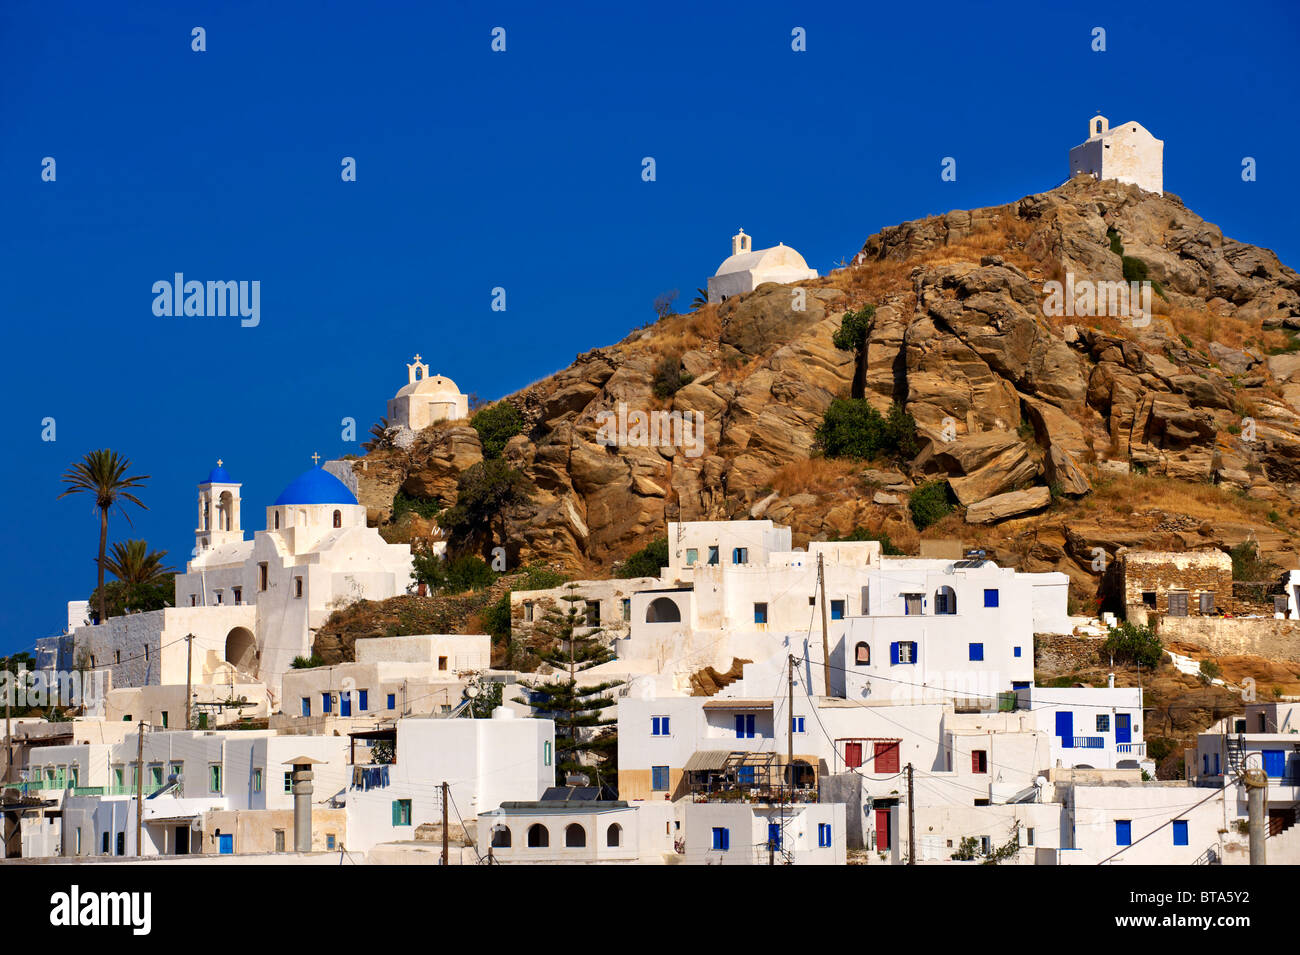 The Hill city of Chora, Ios, Greece, Cyclades Island Stock Photo